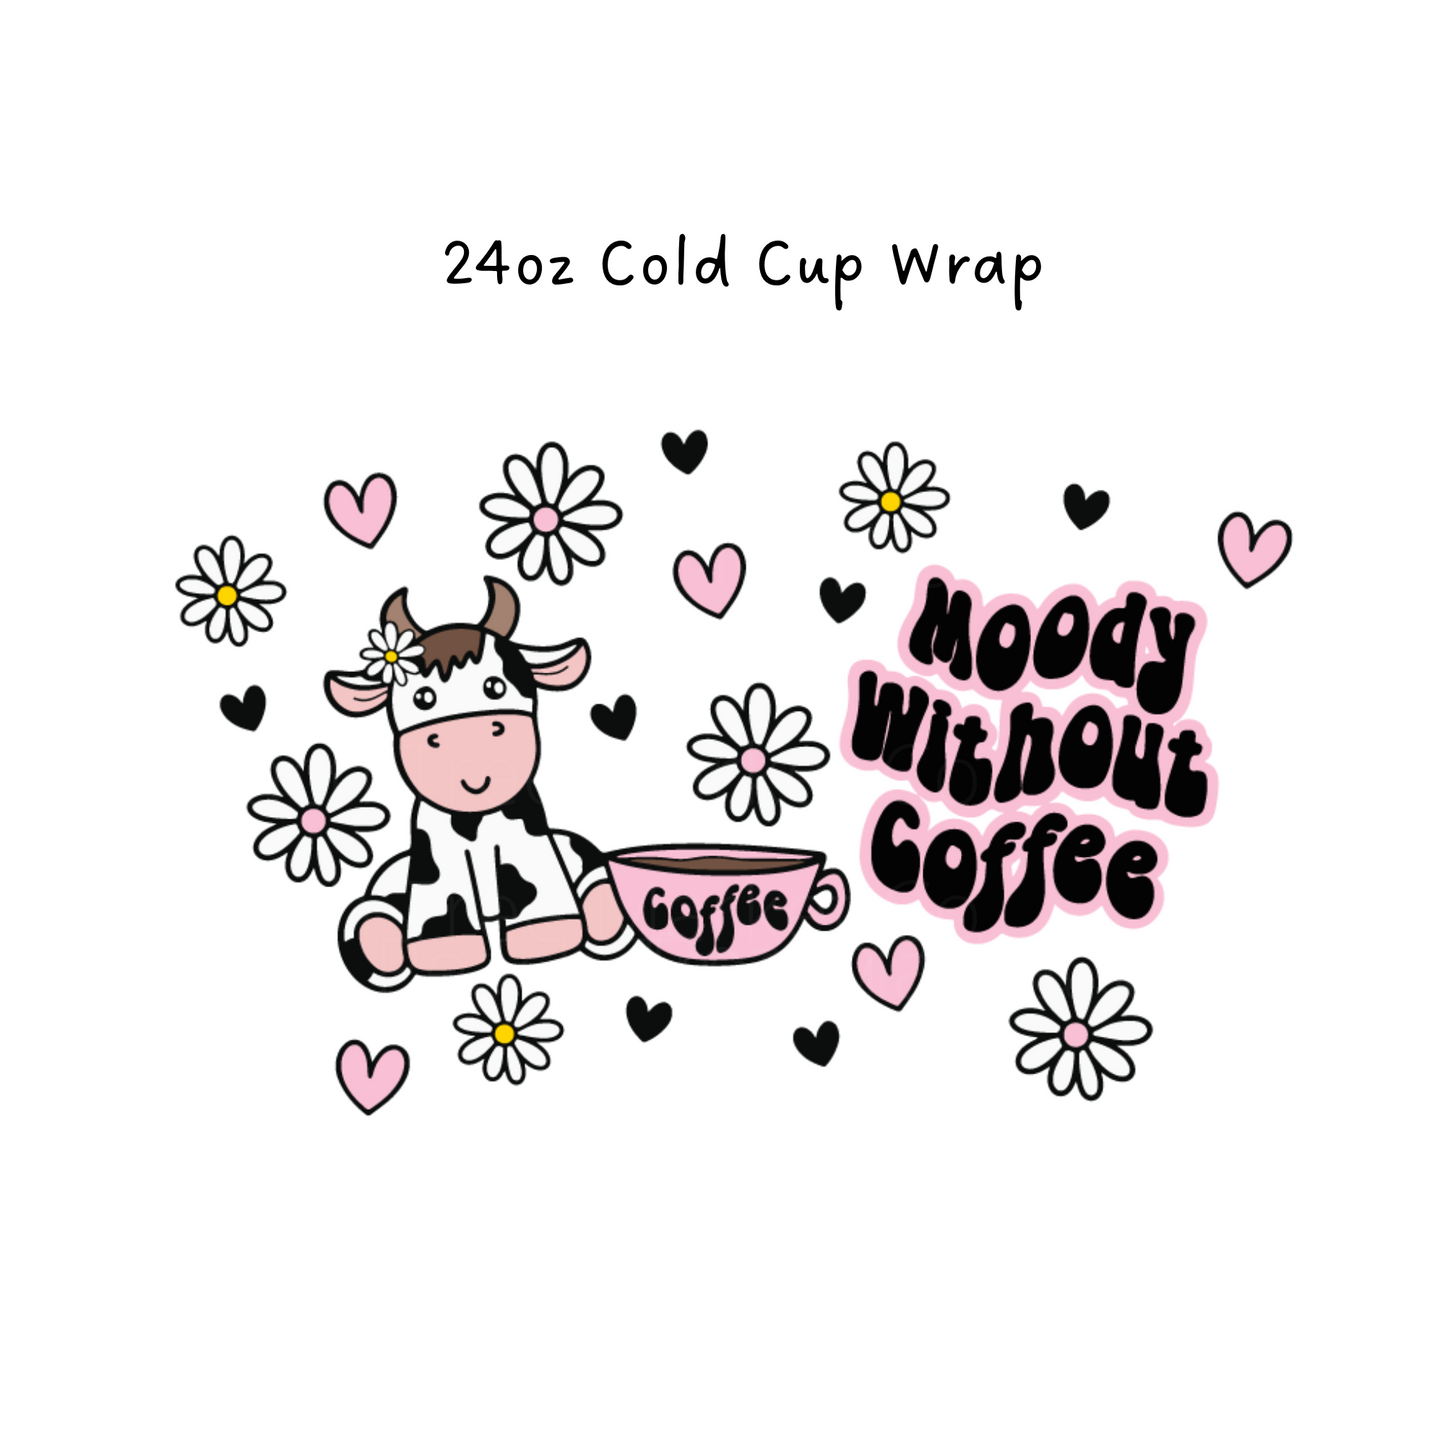 Moody Without Coffee 24 oz Cold Cup Wrap